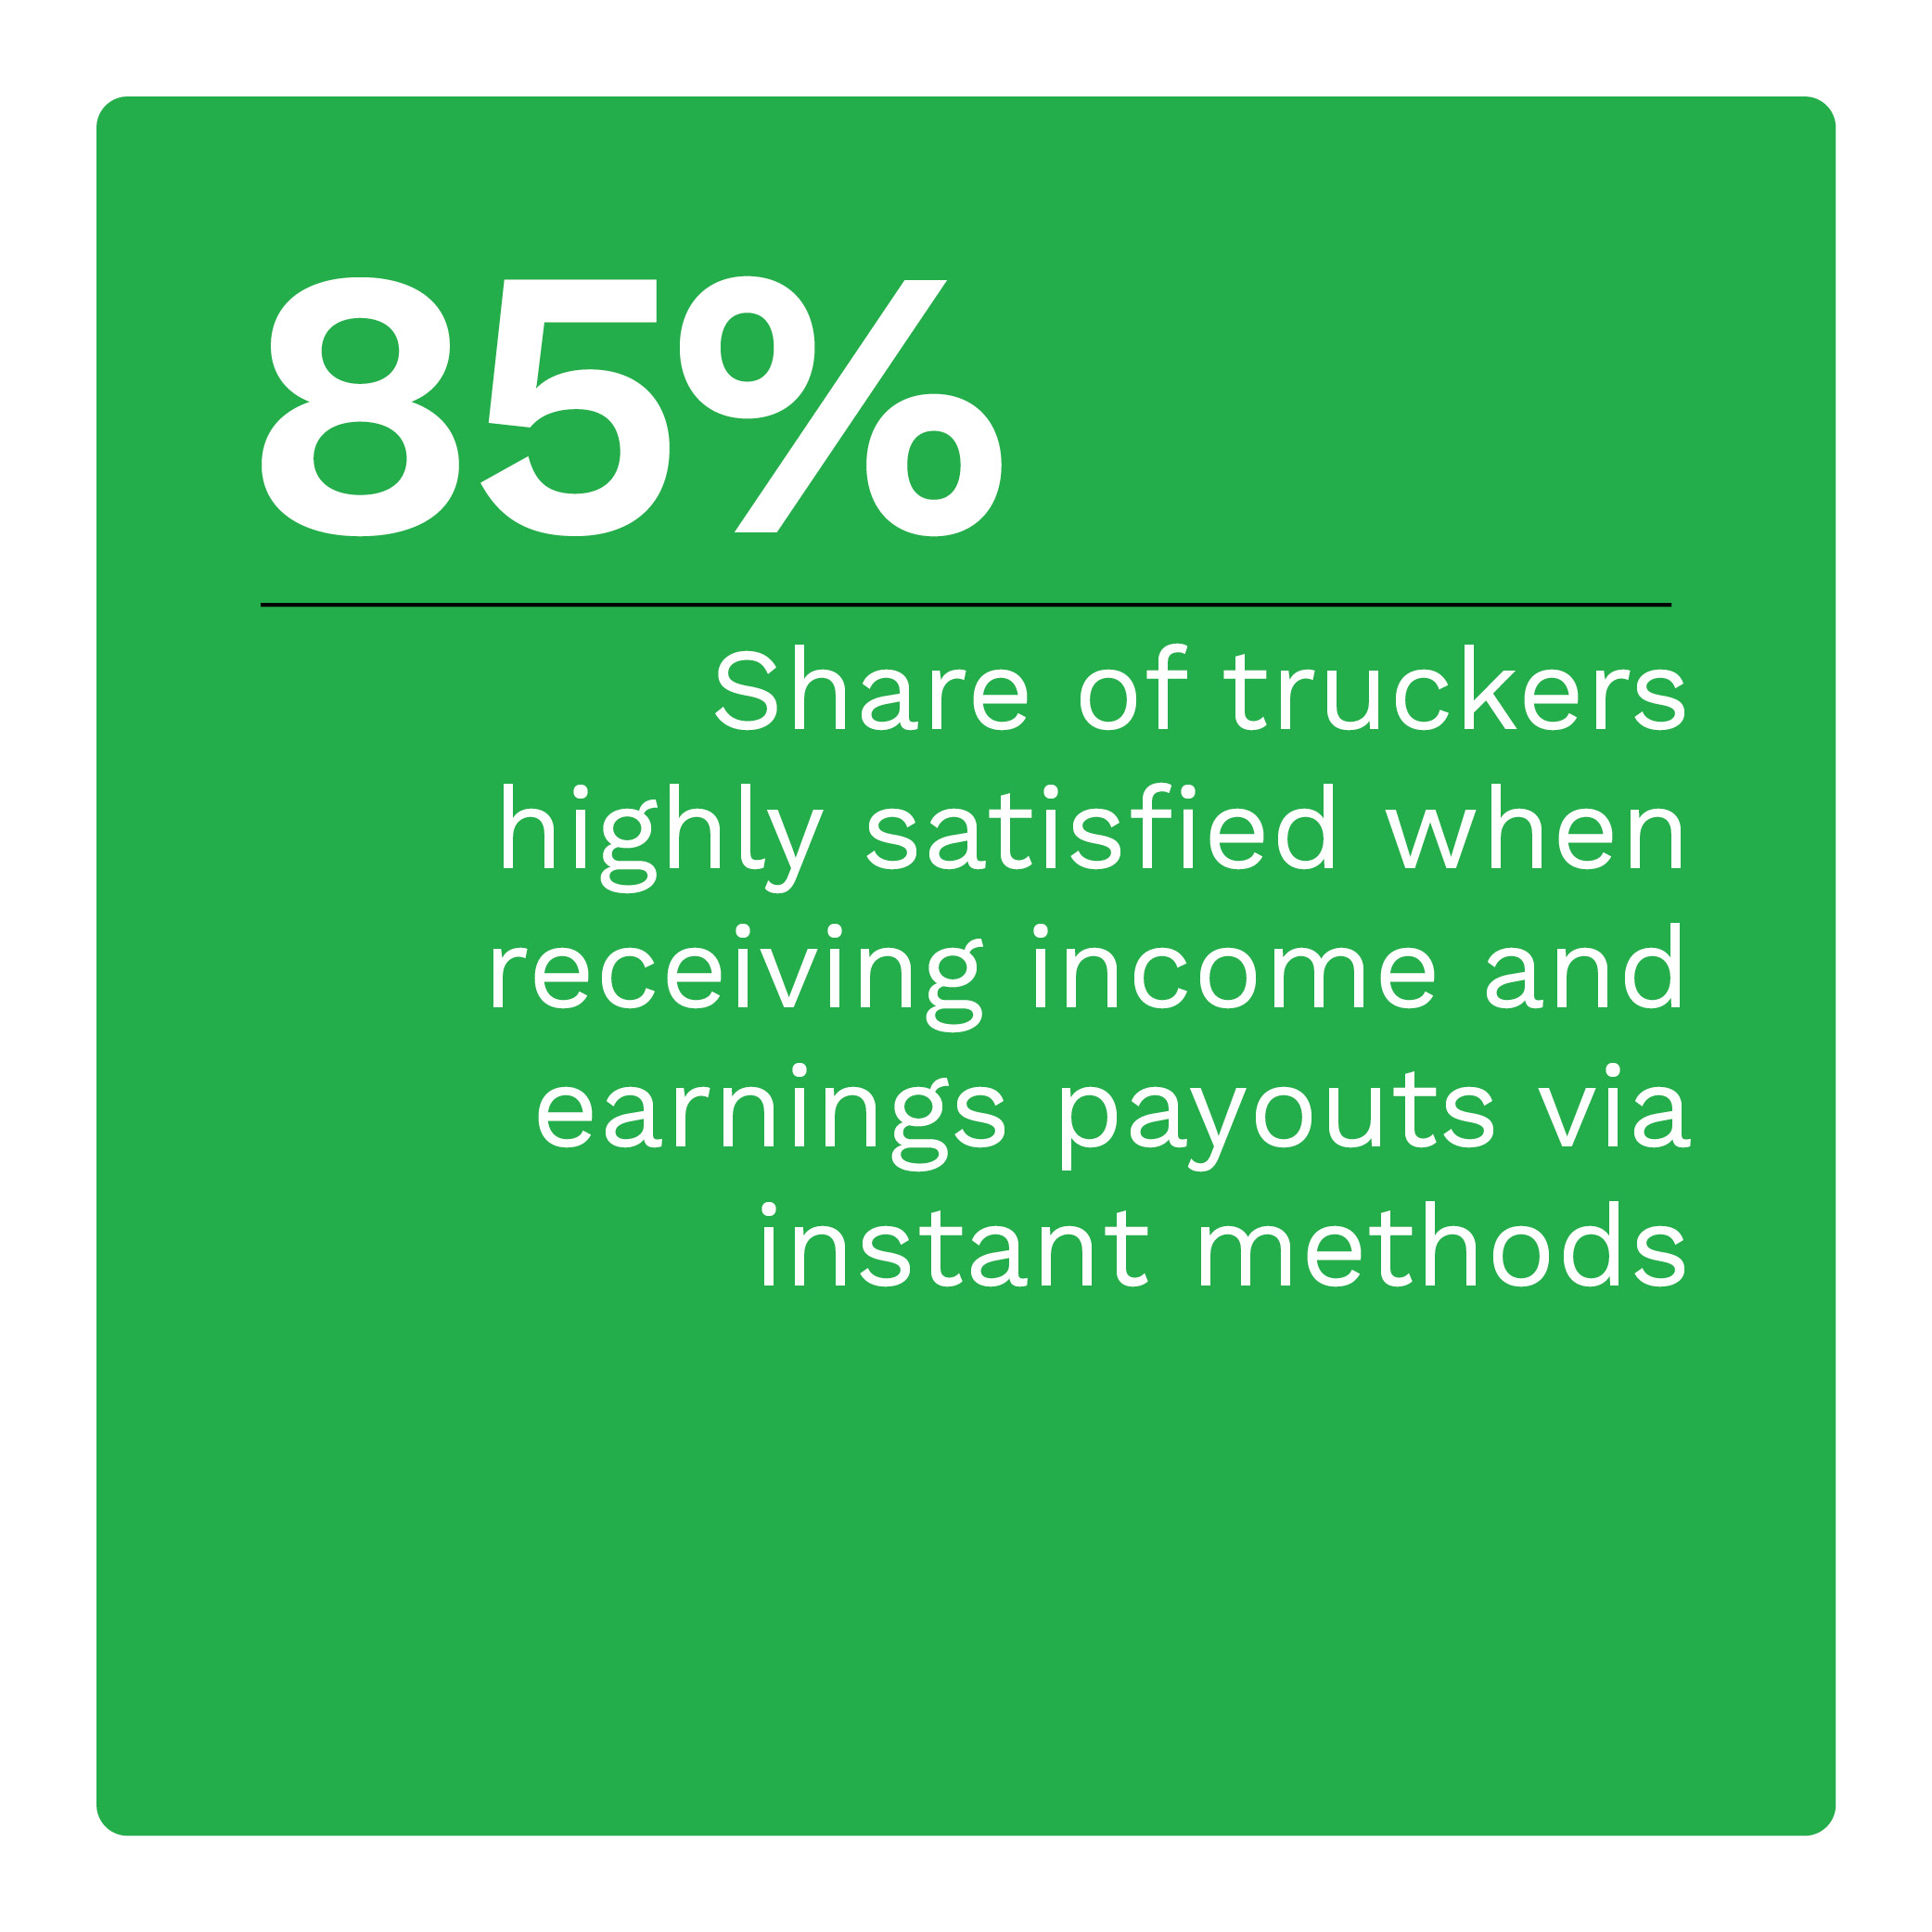 85%: Share of truckers highly satisfied when receiving income and earnings payouts via instant methods 